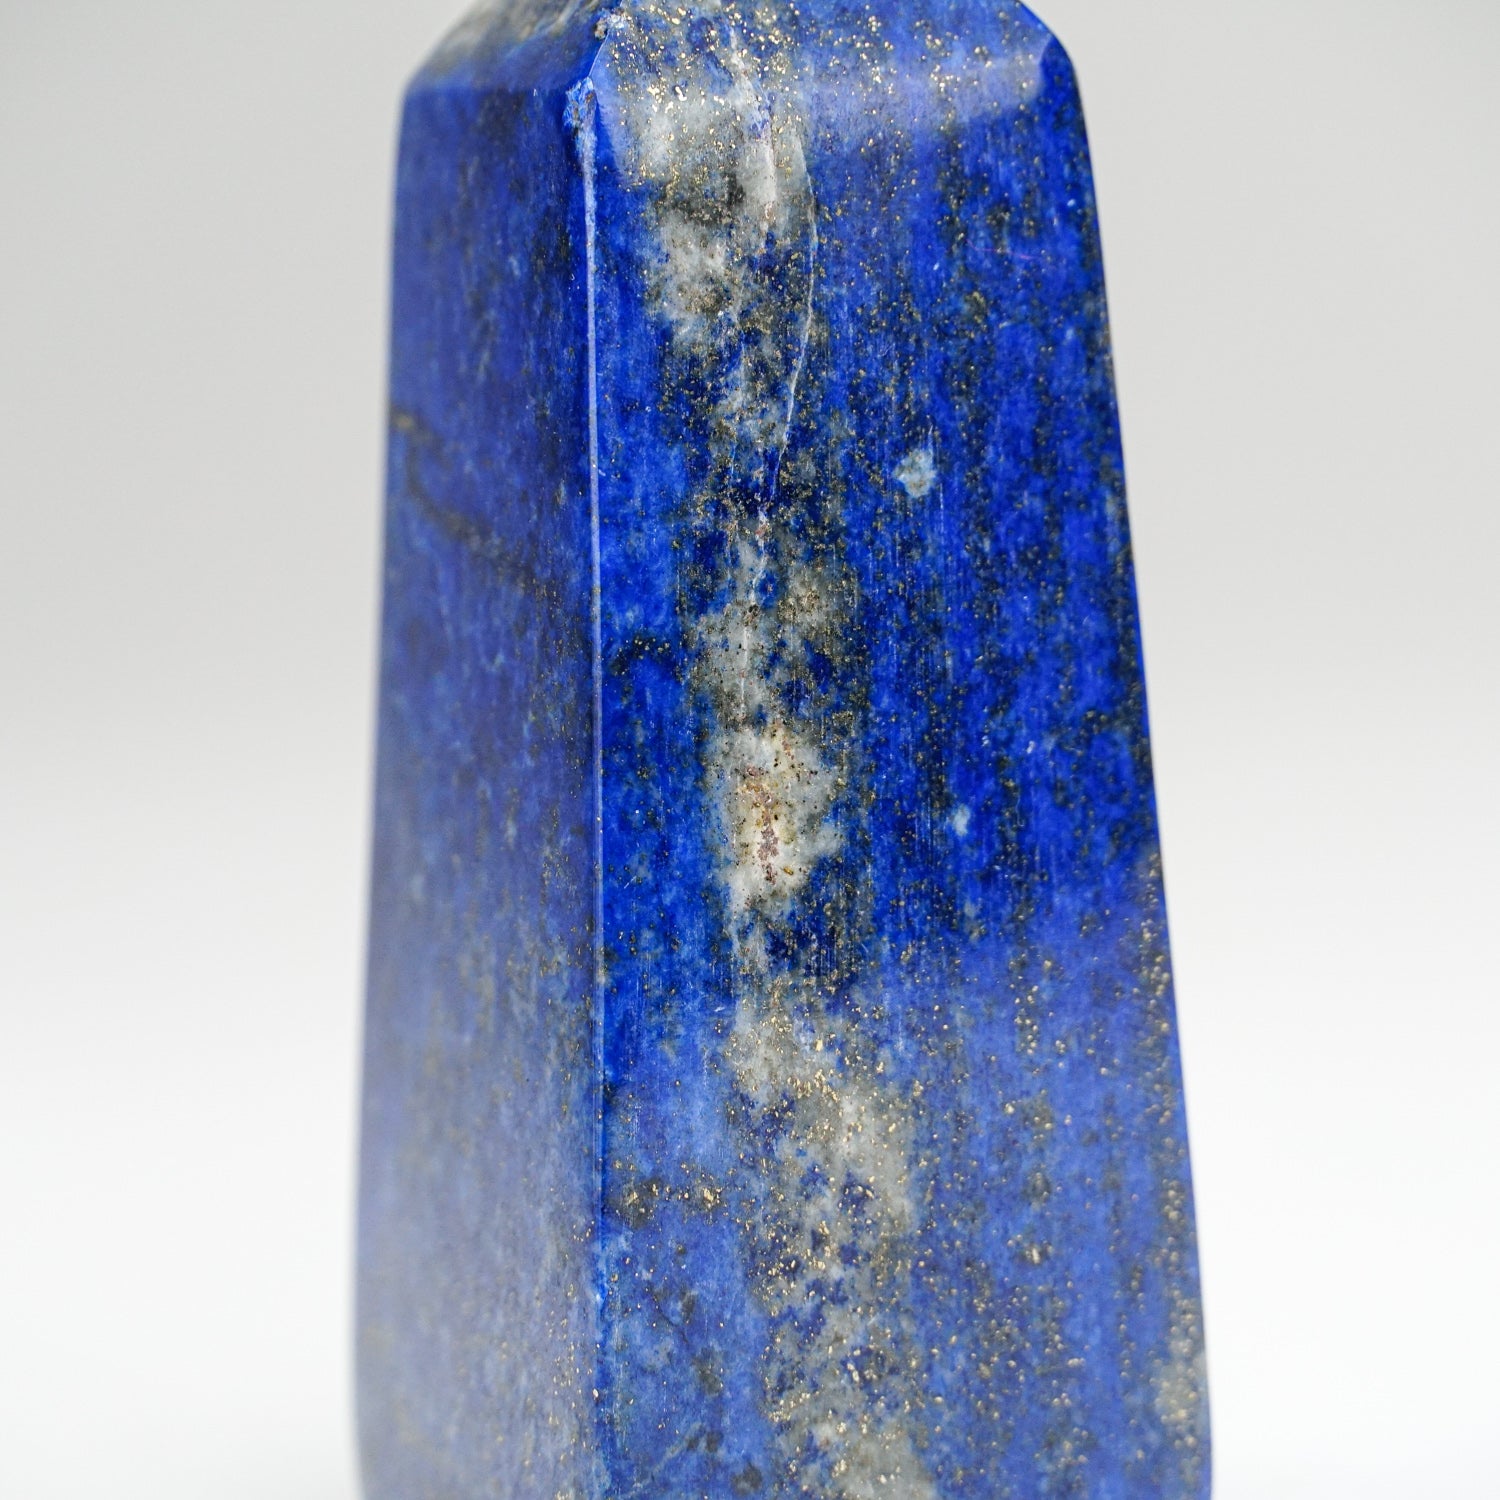 Polished Lapis Lazuli Point from Afghanistan (150.6 grams)